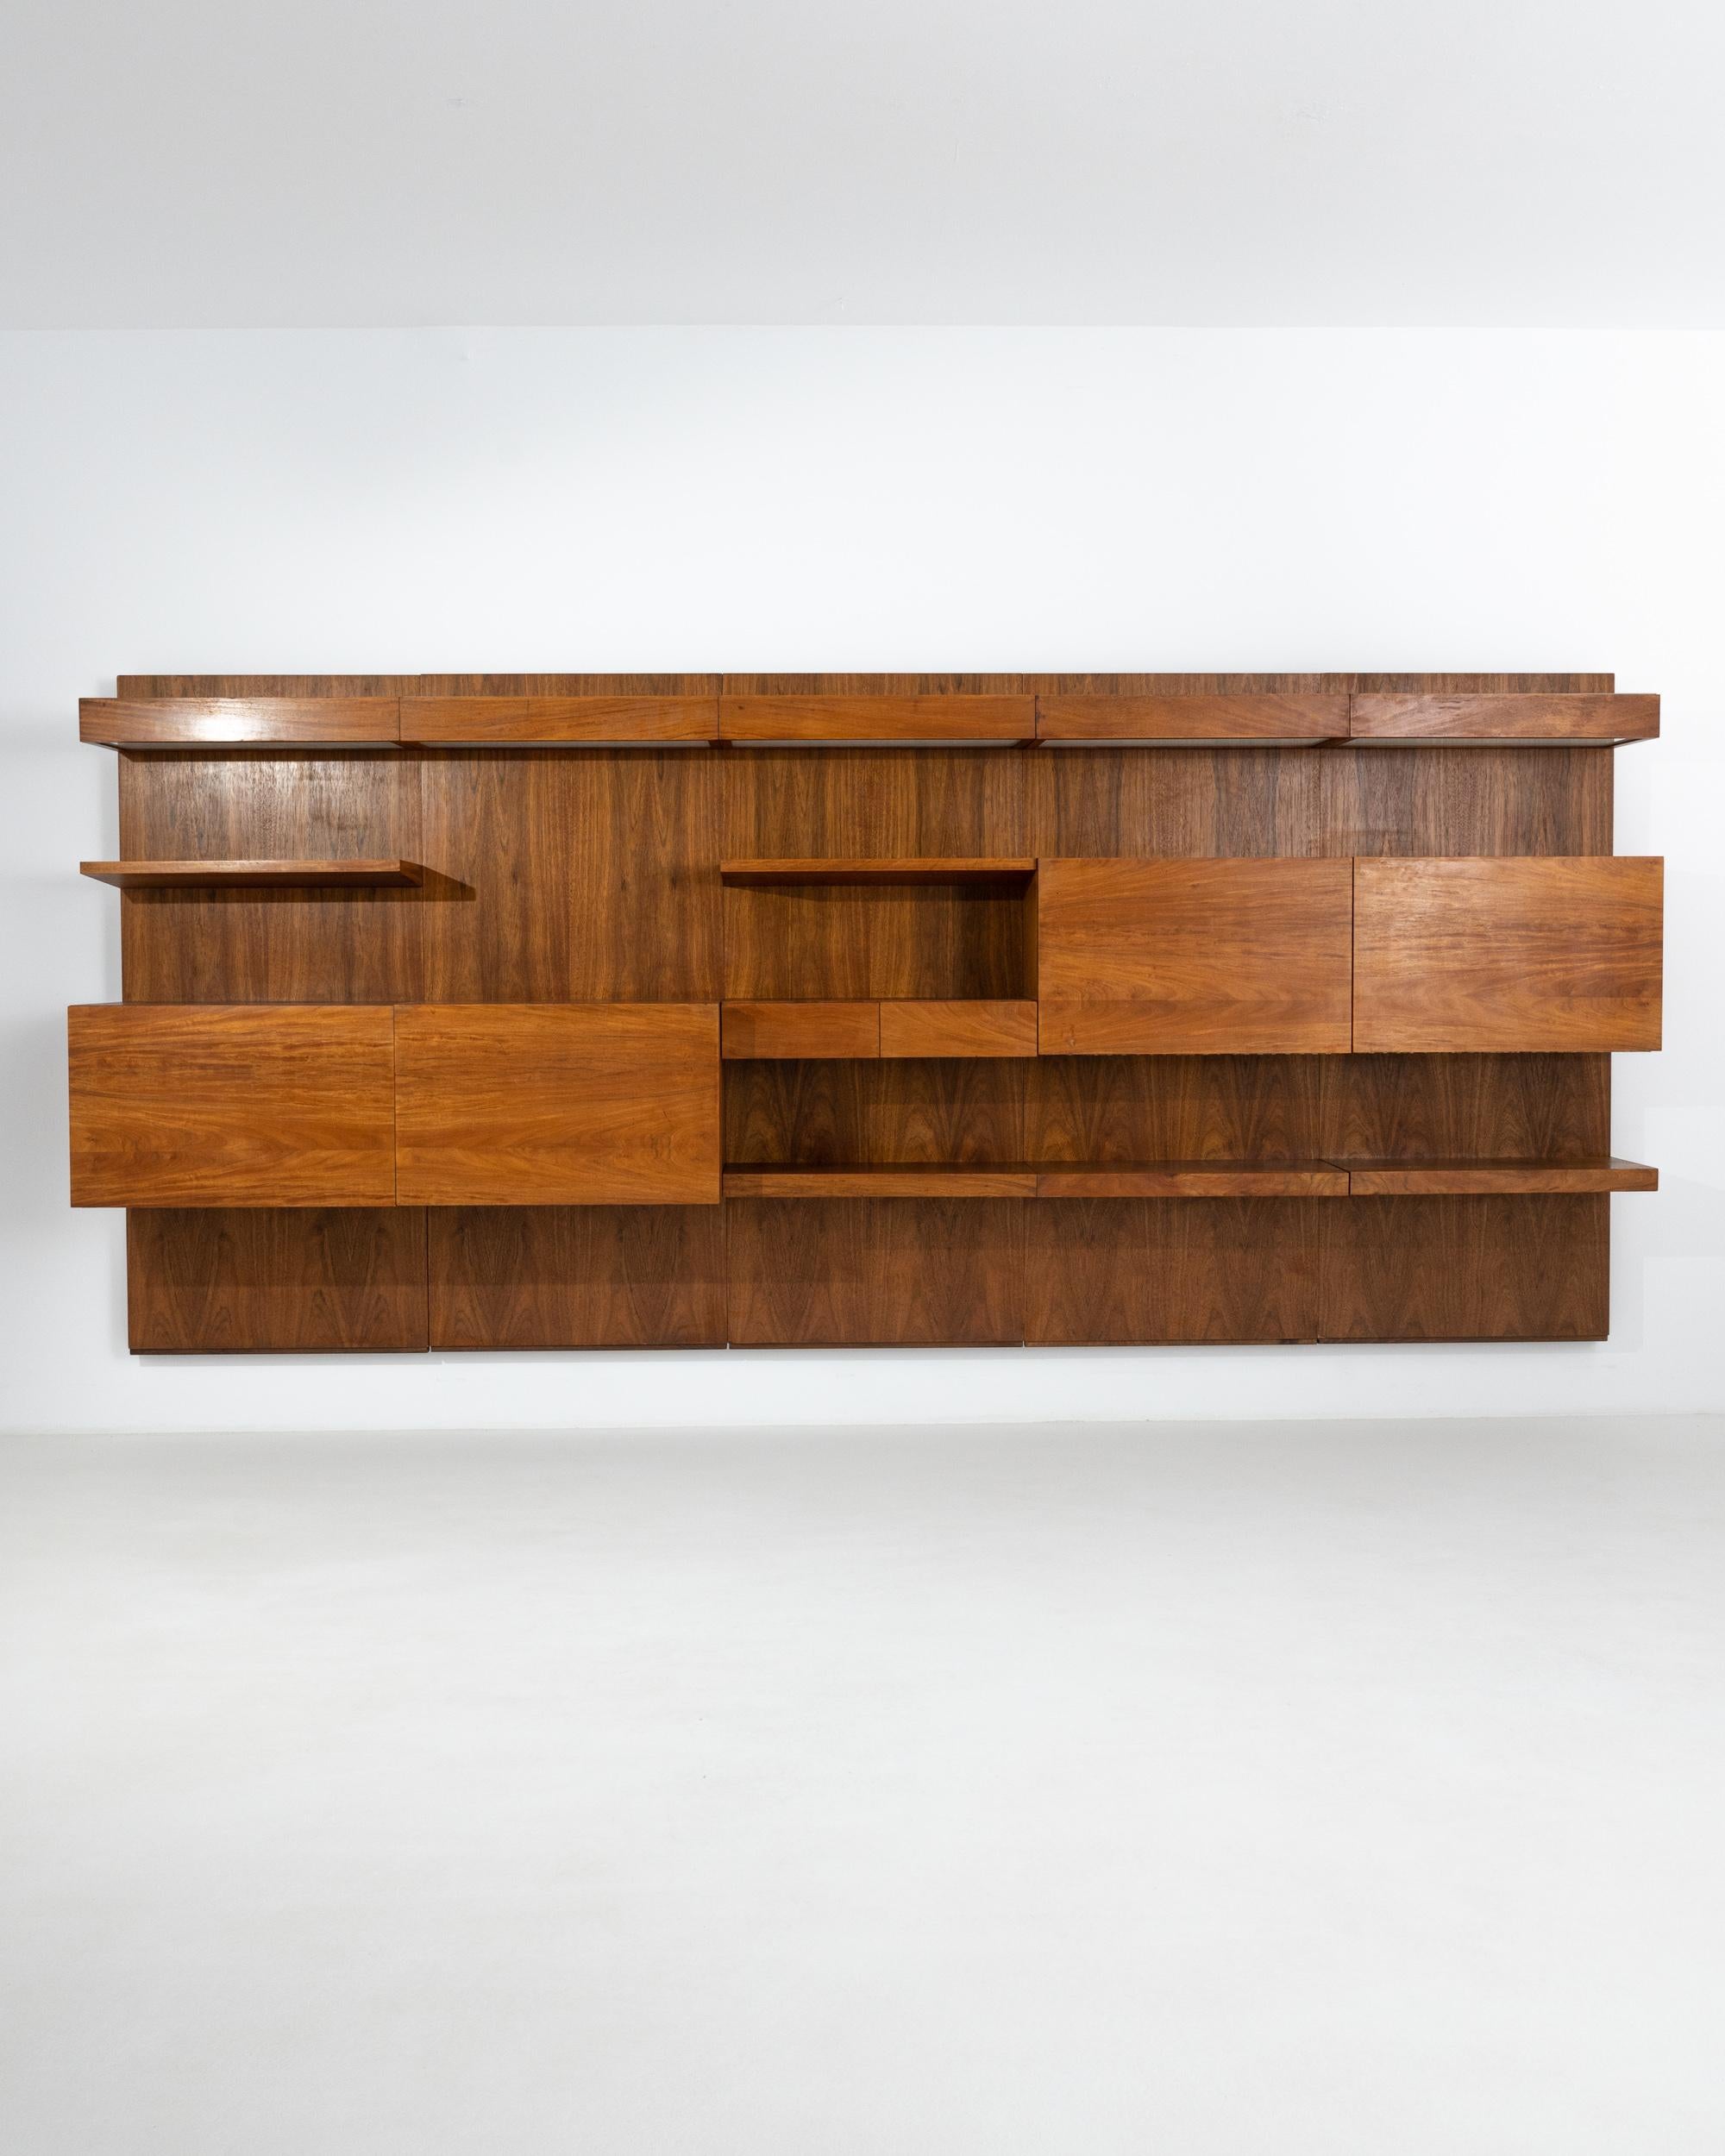 The sleek geometry of linear shelves reveals the fashionable Mid-Century Modern nature of this vintage teak wall unit. Made in the 1960s in Central Europe, this stylish cupboard features a set of open bookshelves and spacious compartments with